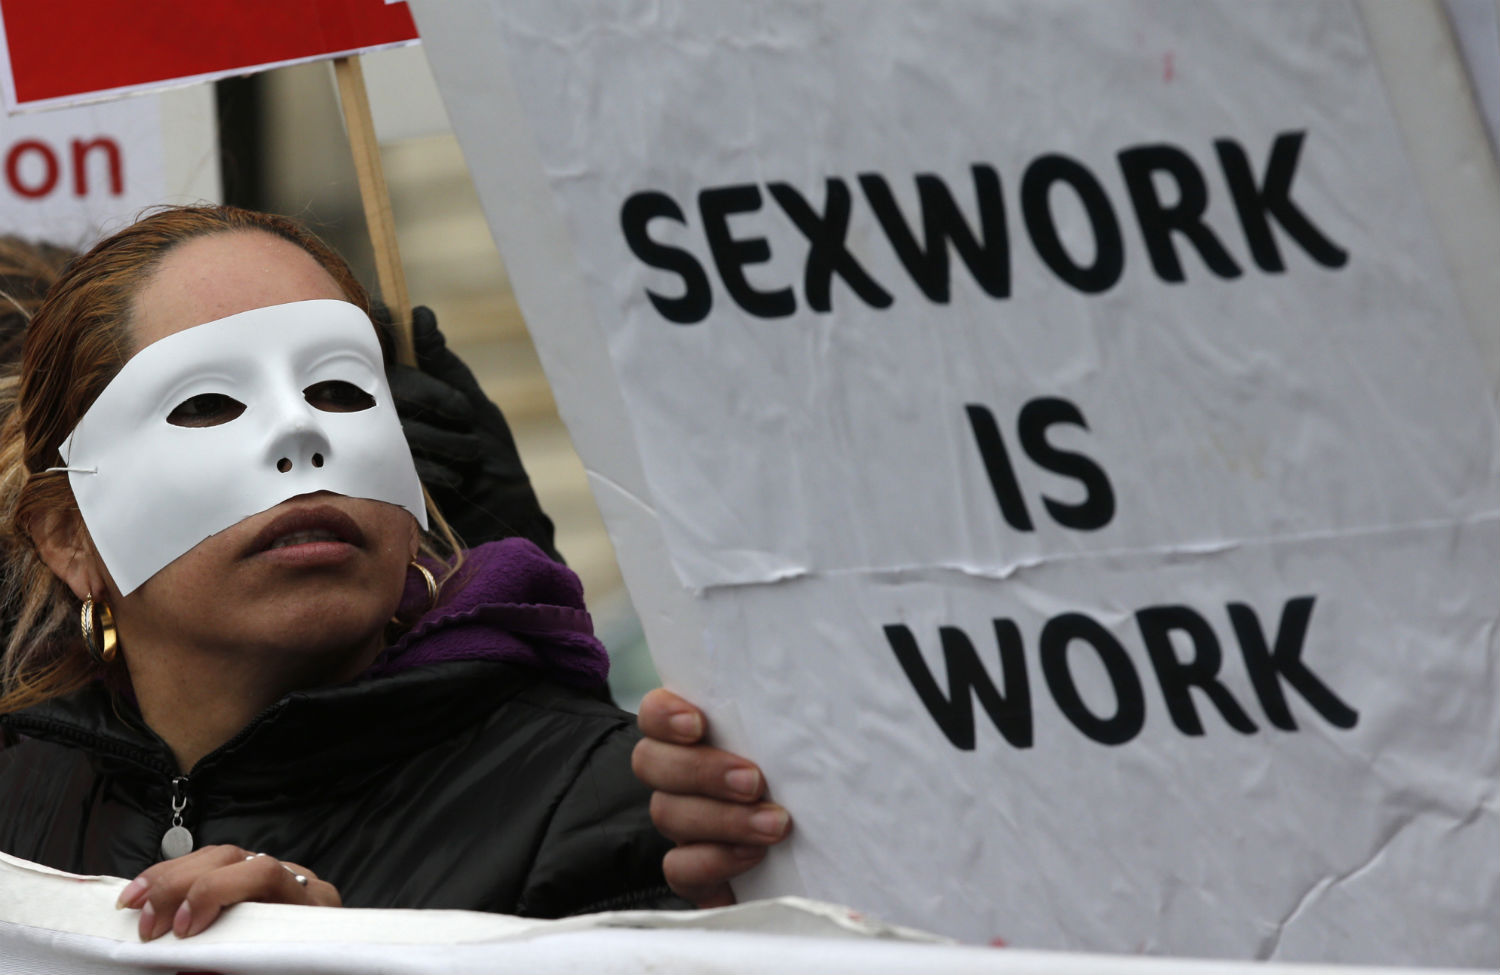 Let’s Call Sex Work What It Is: Work